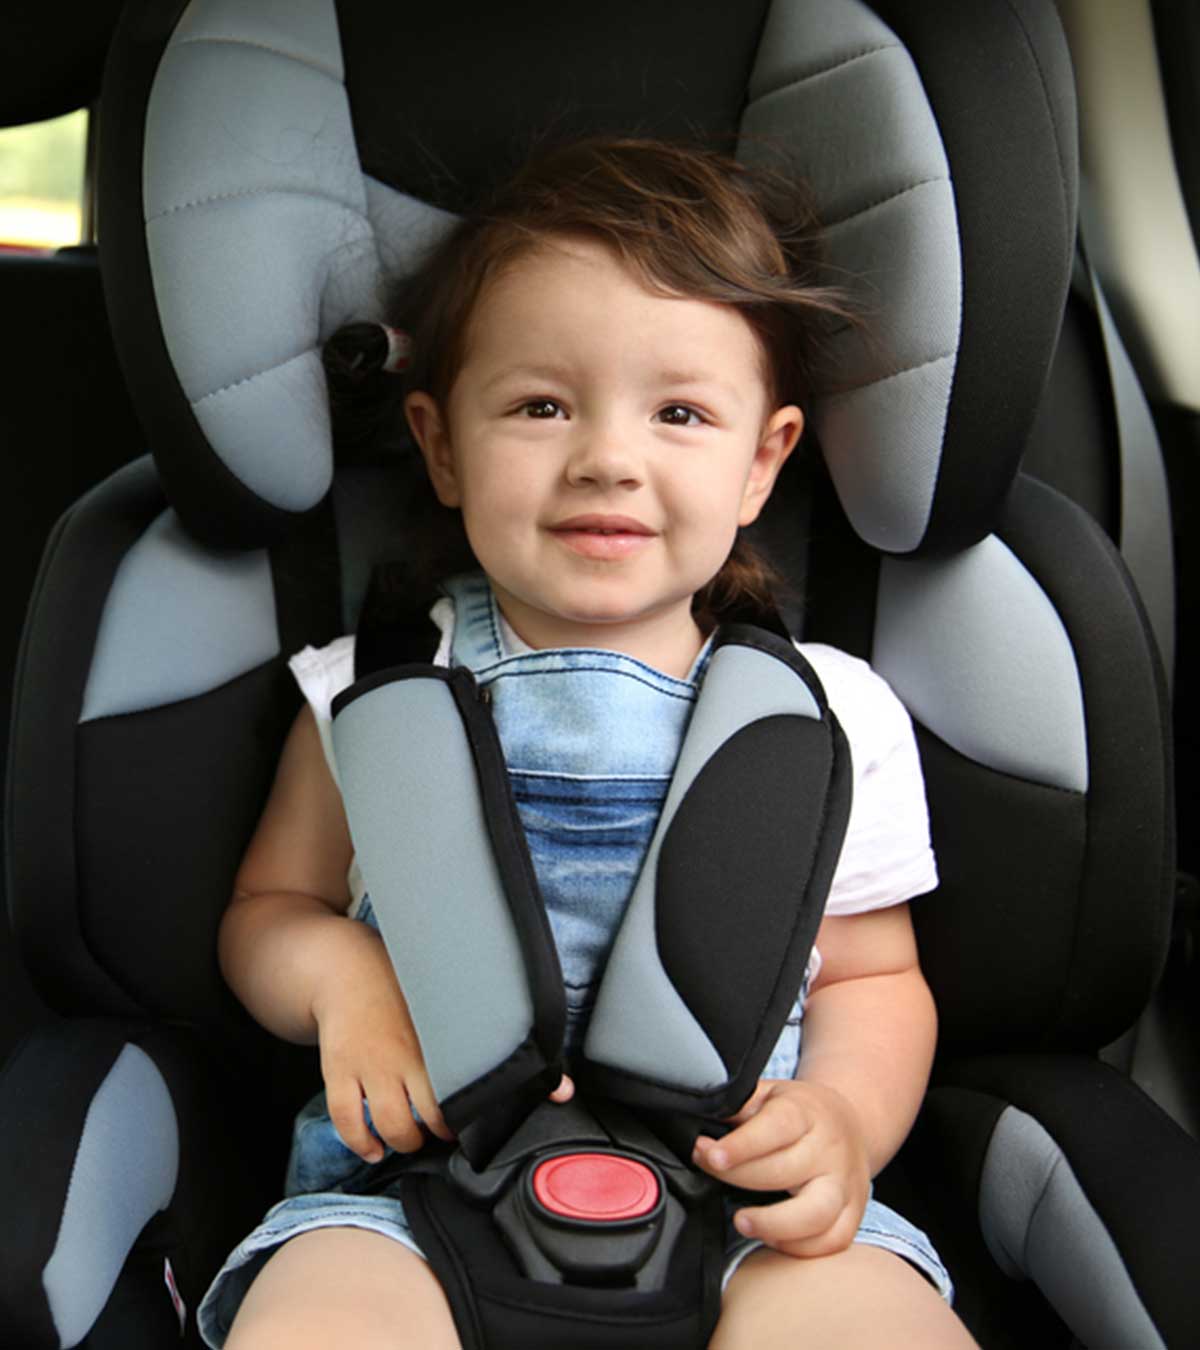 10 Car Seat Facts Every Parent Should Know